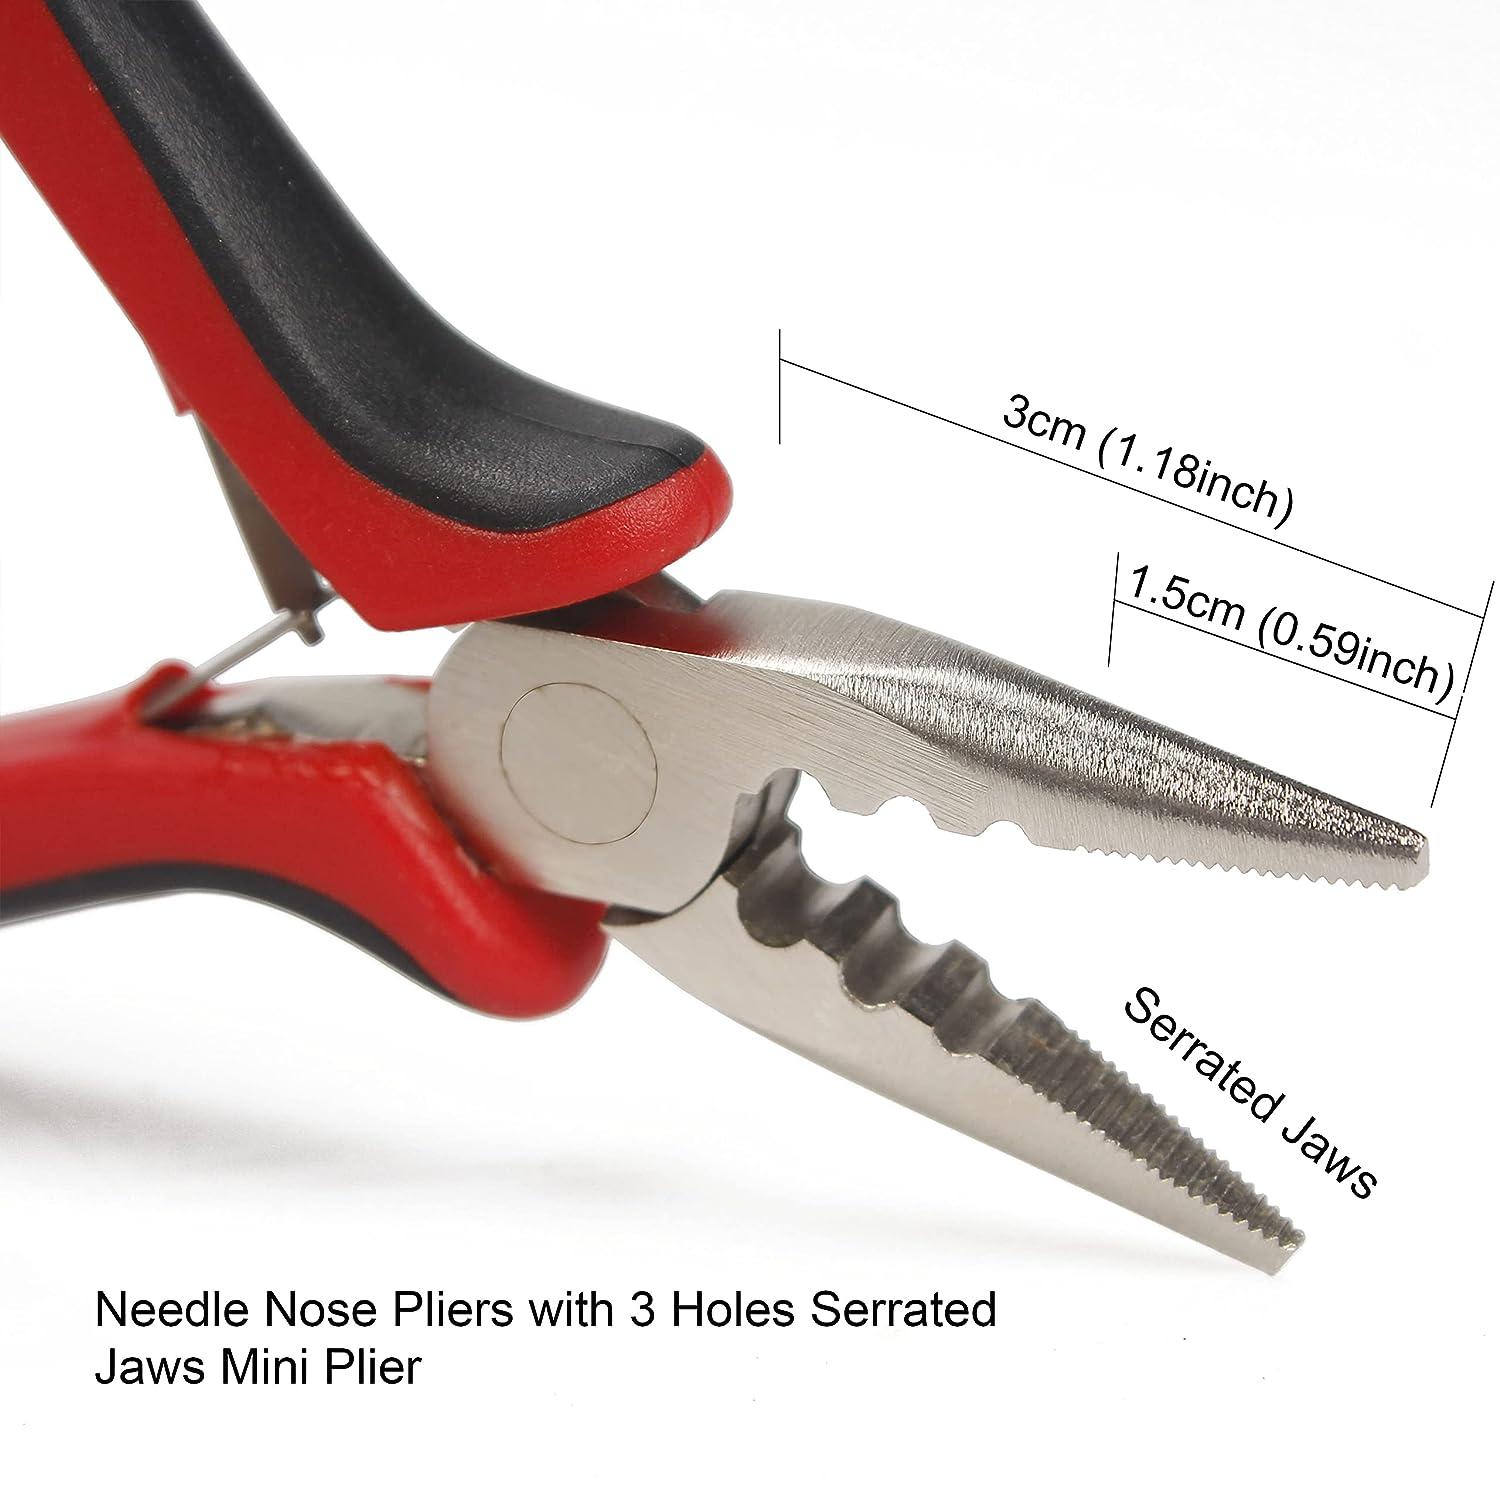 Flat nose pliers, 7'', serrated jaws